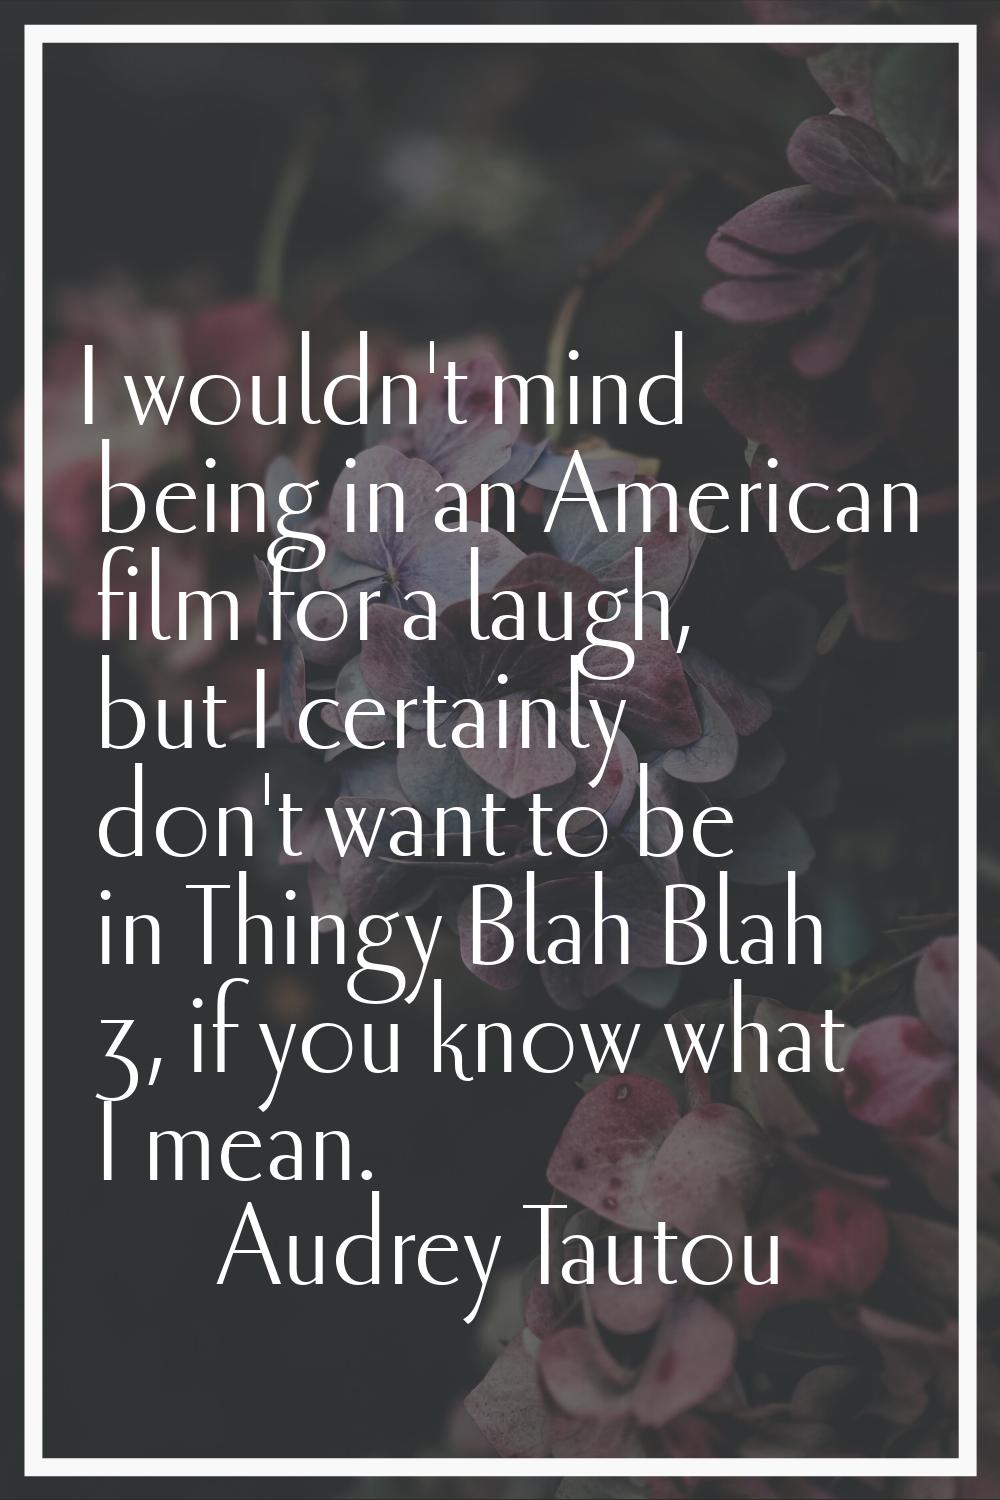 I wouldn't mind being in an American film for a laugh, but I certainly don't want to be in Thingy B